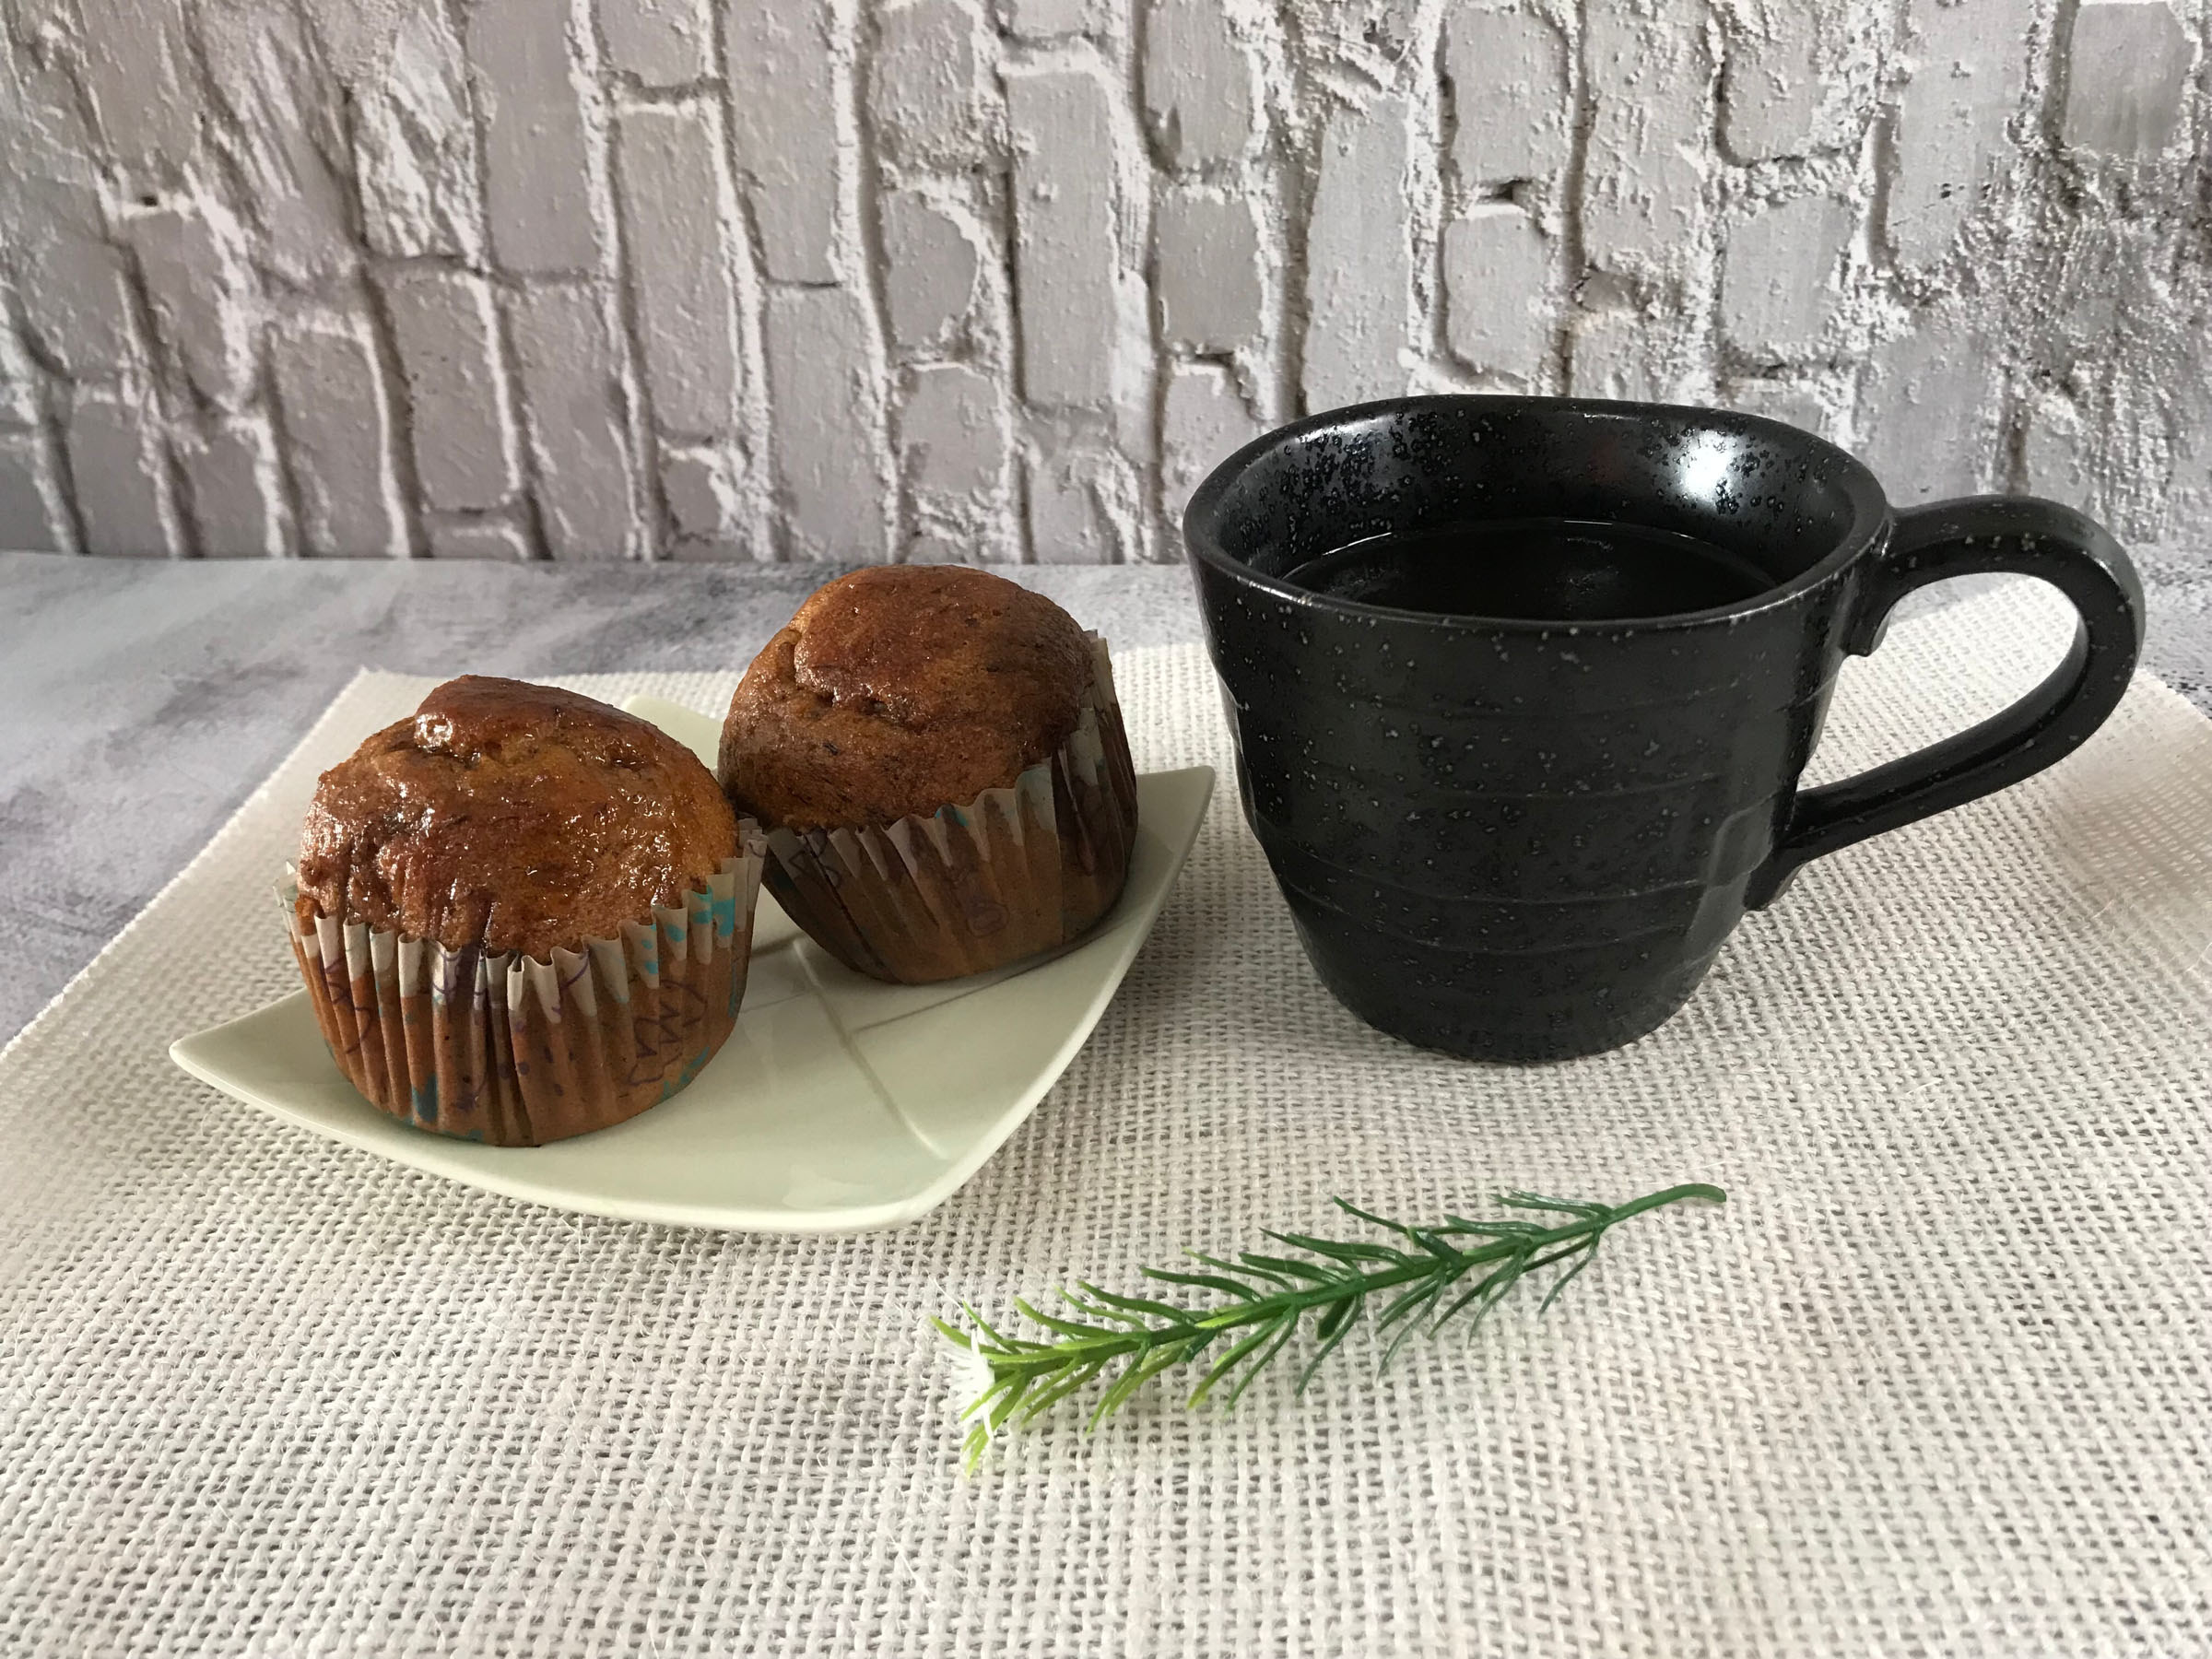 Two muffins on a plate next to a mug